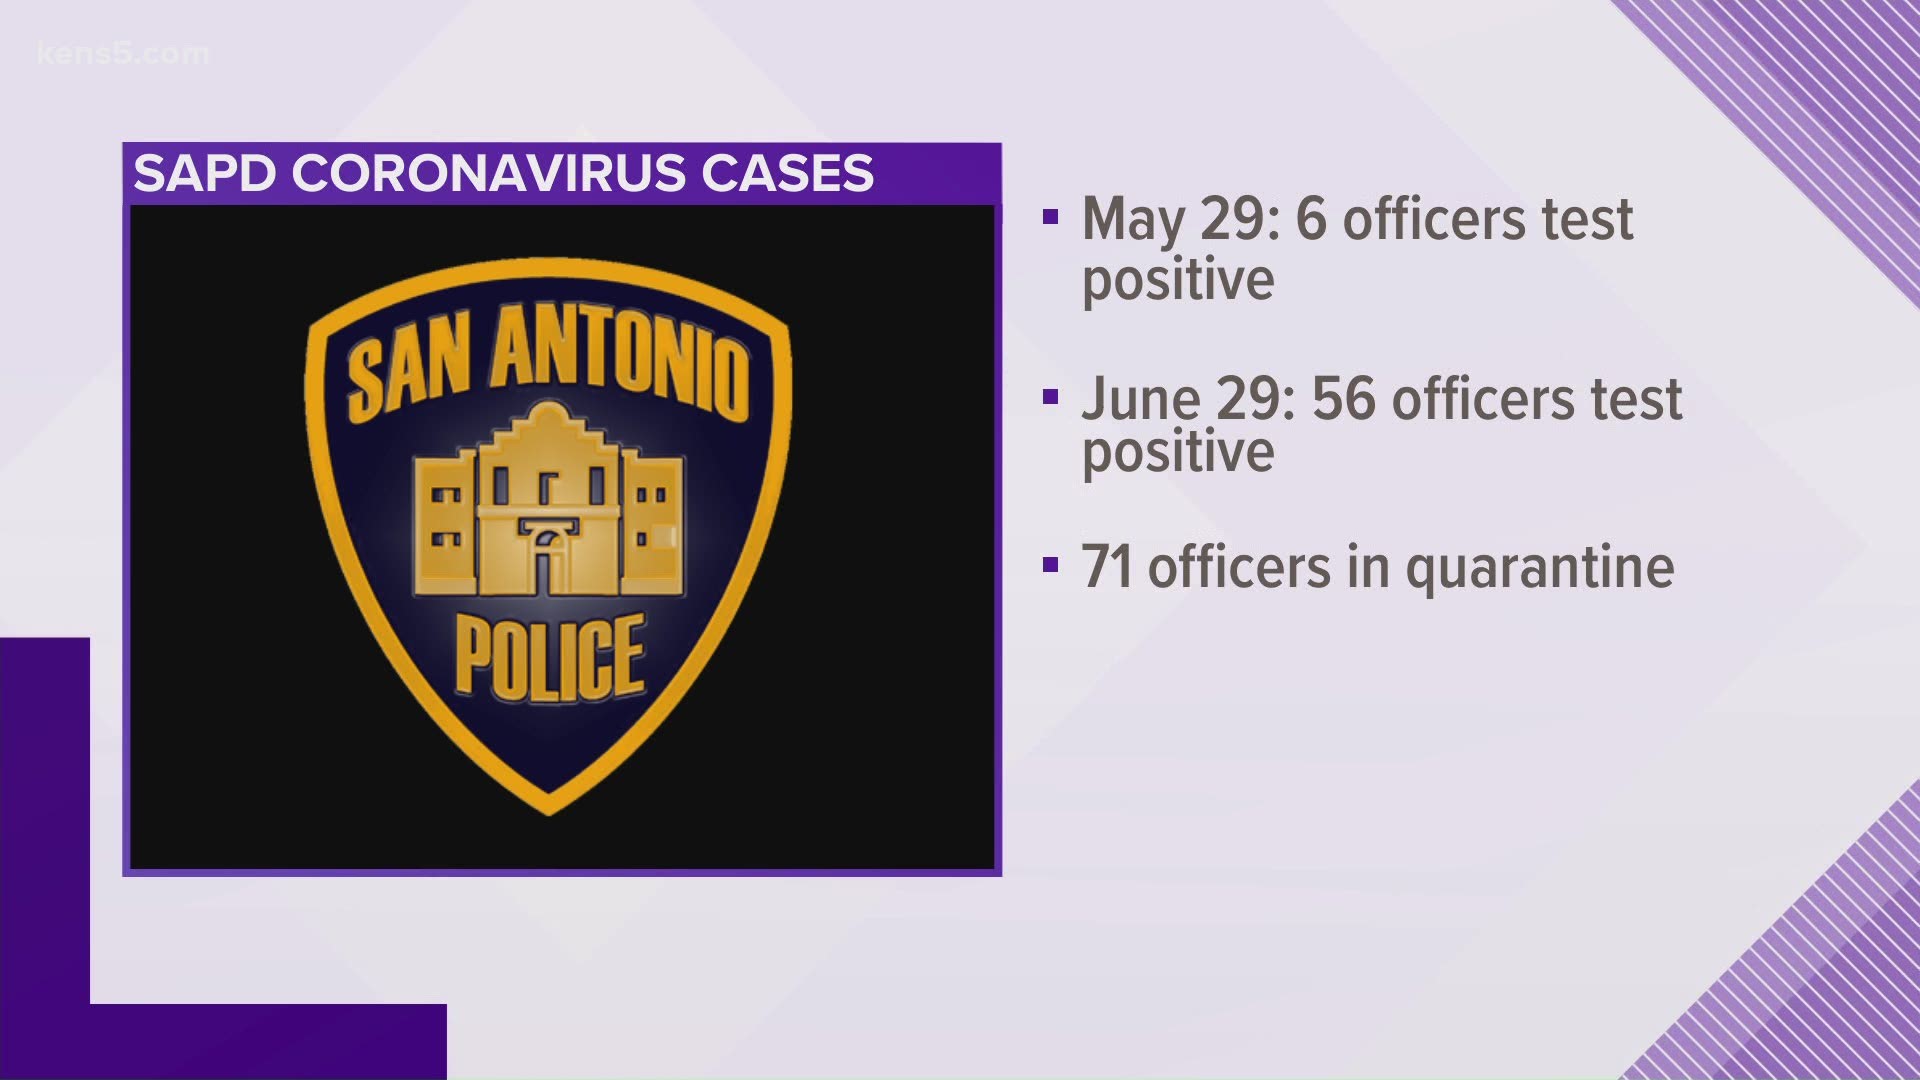 The San Antonio Police Department has reported 56 officers who have tested positive for coronavirus.